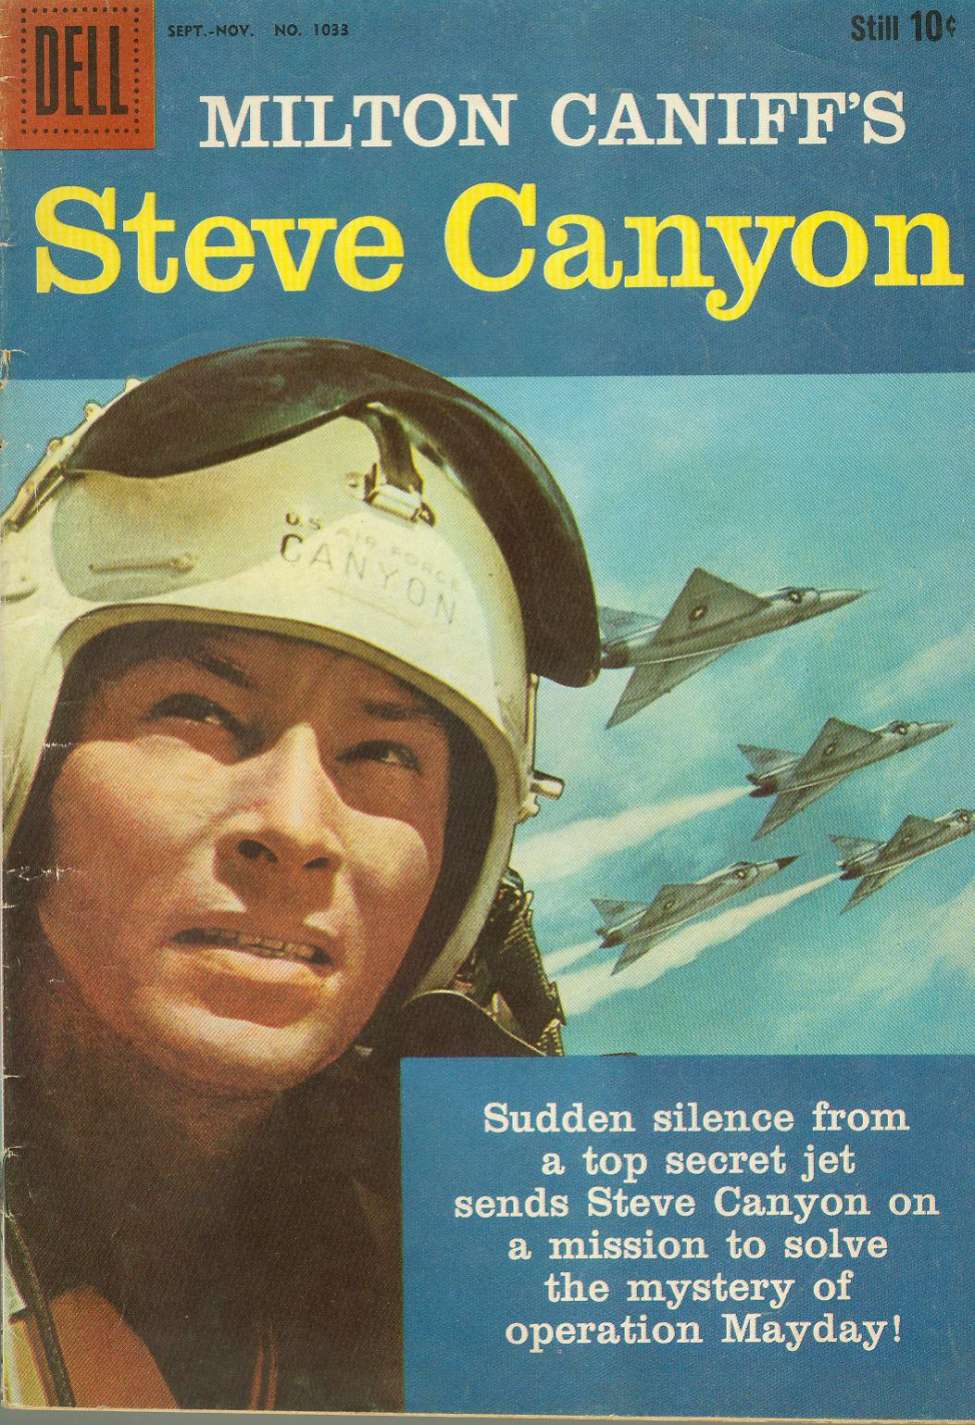 Comic Book Cover For 1033 - Milton Caniff's Steve Canyon